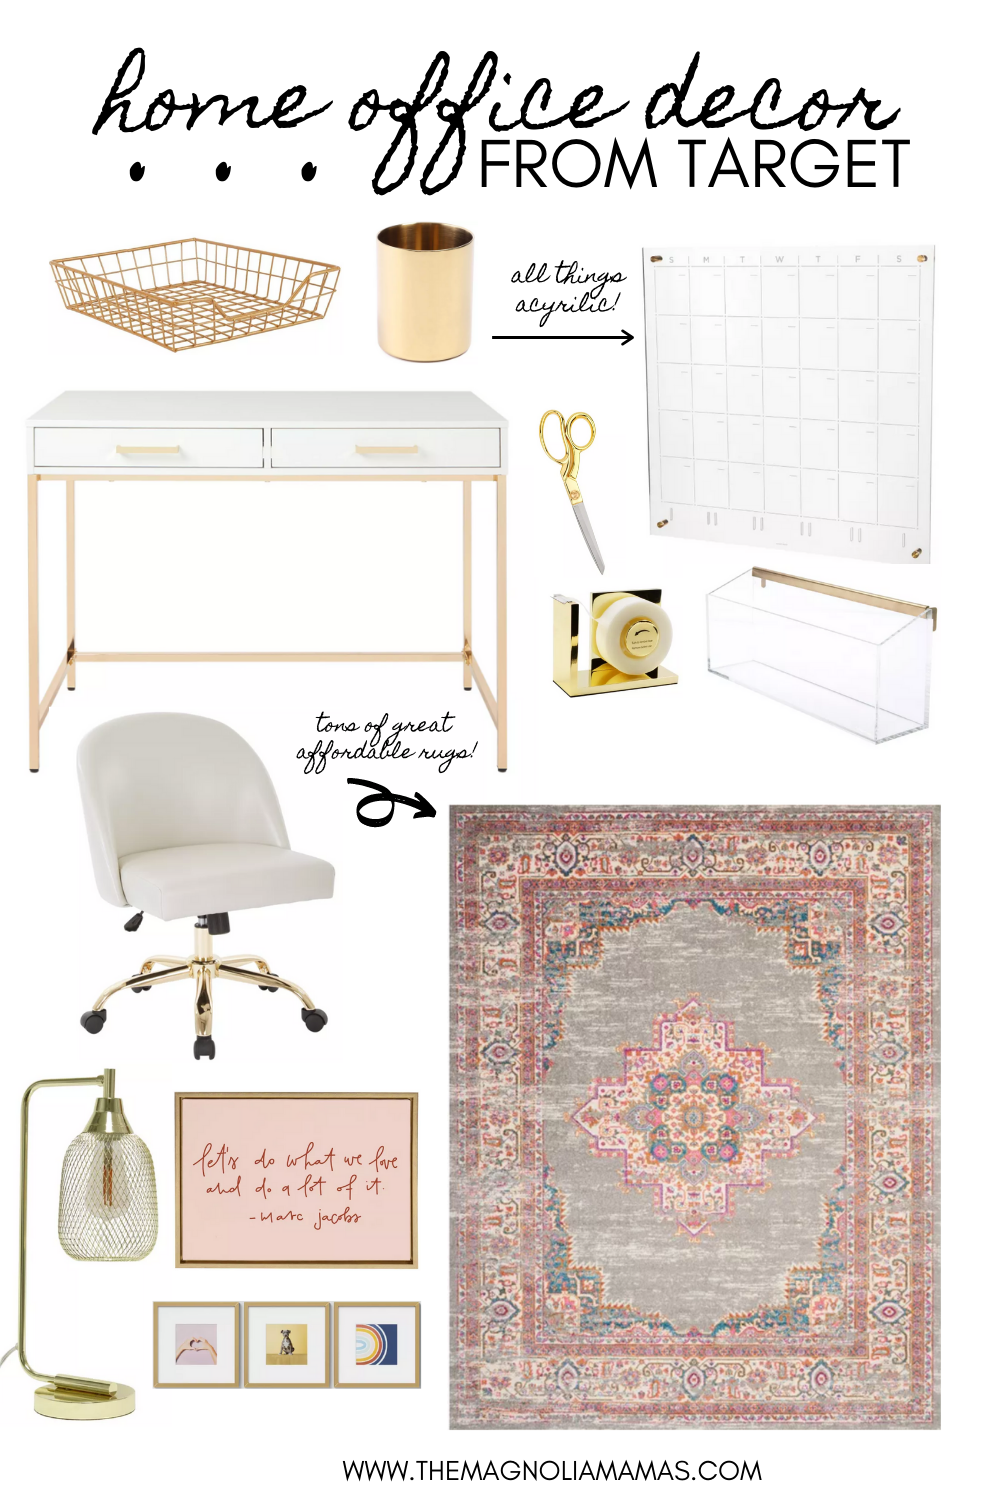 Magnolia Mamas : Home Office Decor Inspo from Target